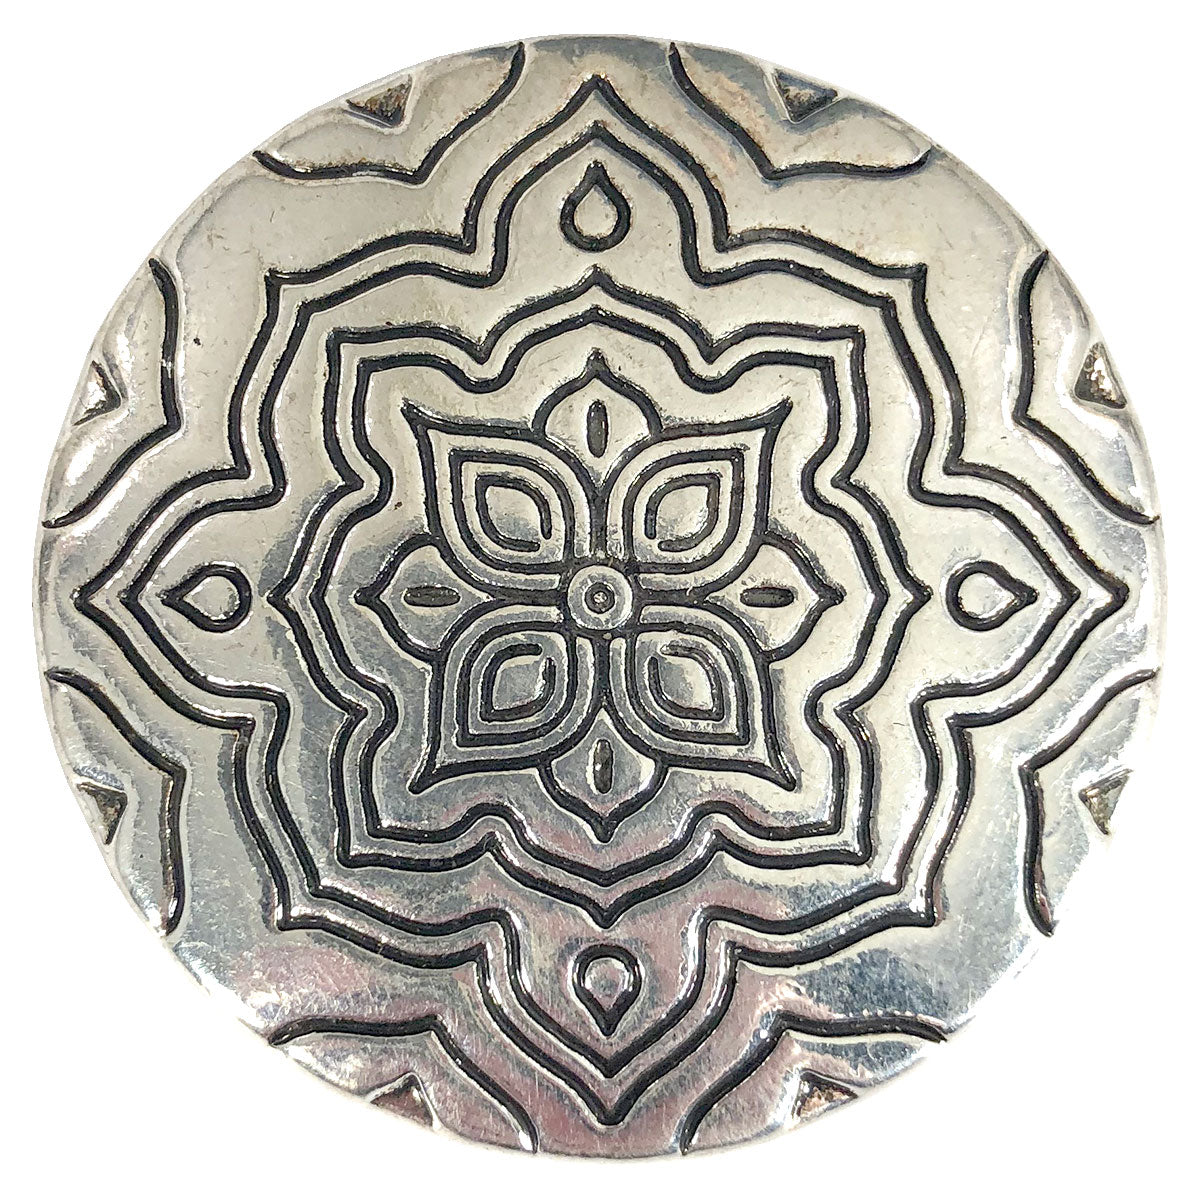 Floral etched round. Magnetic Brooch for Scarves Artistic Sculptural shapes add a personality to absolutely anything you wish to put your stamp on! The Super Strong Magnet is enough for a jacket lapel! Use to hold a sarong or cardigan together.  Great to adorn a hat or to hold a scarf in place with Fabric Safe Magnet.